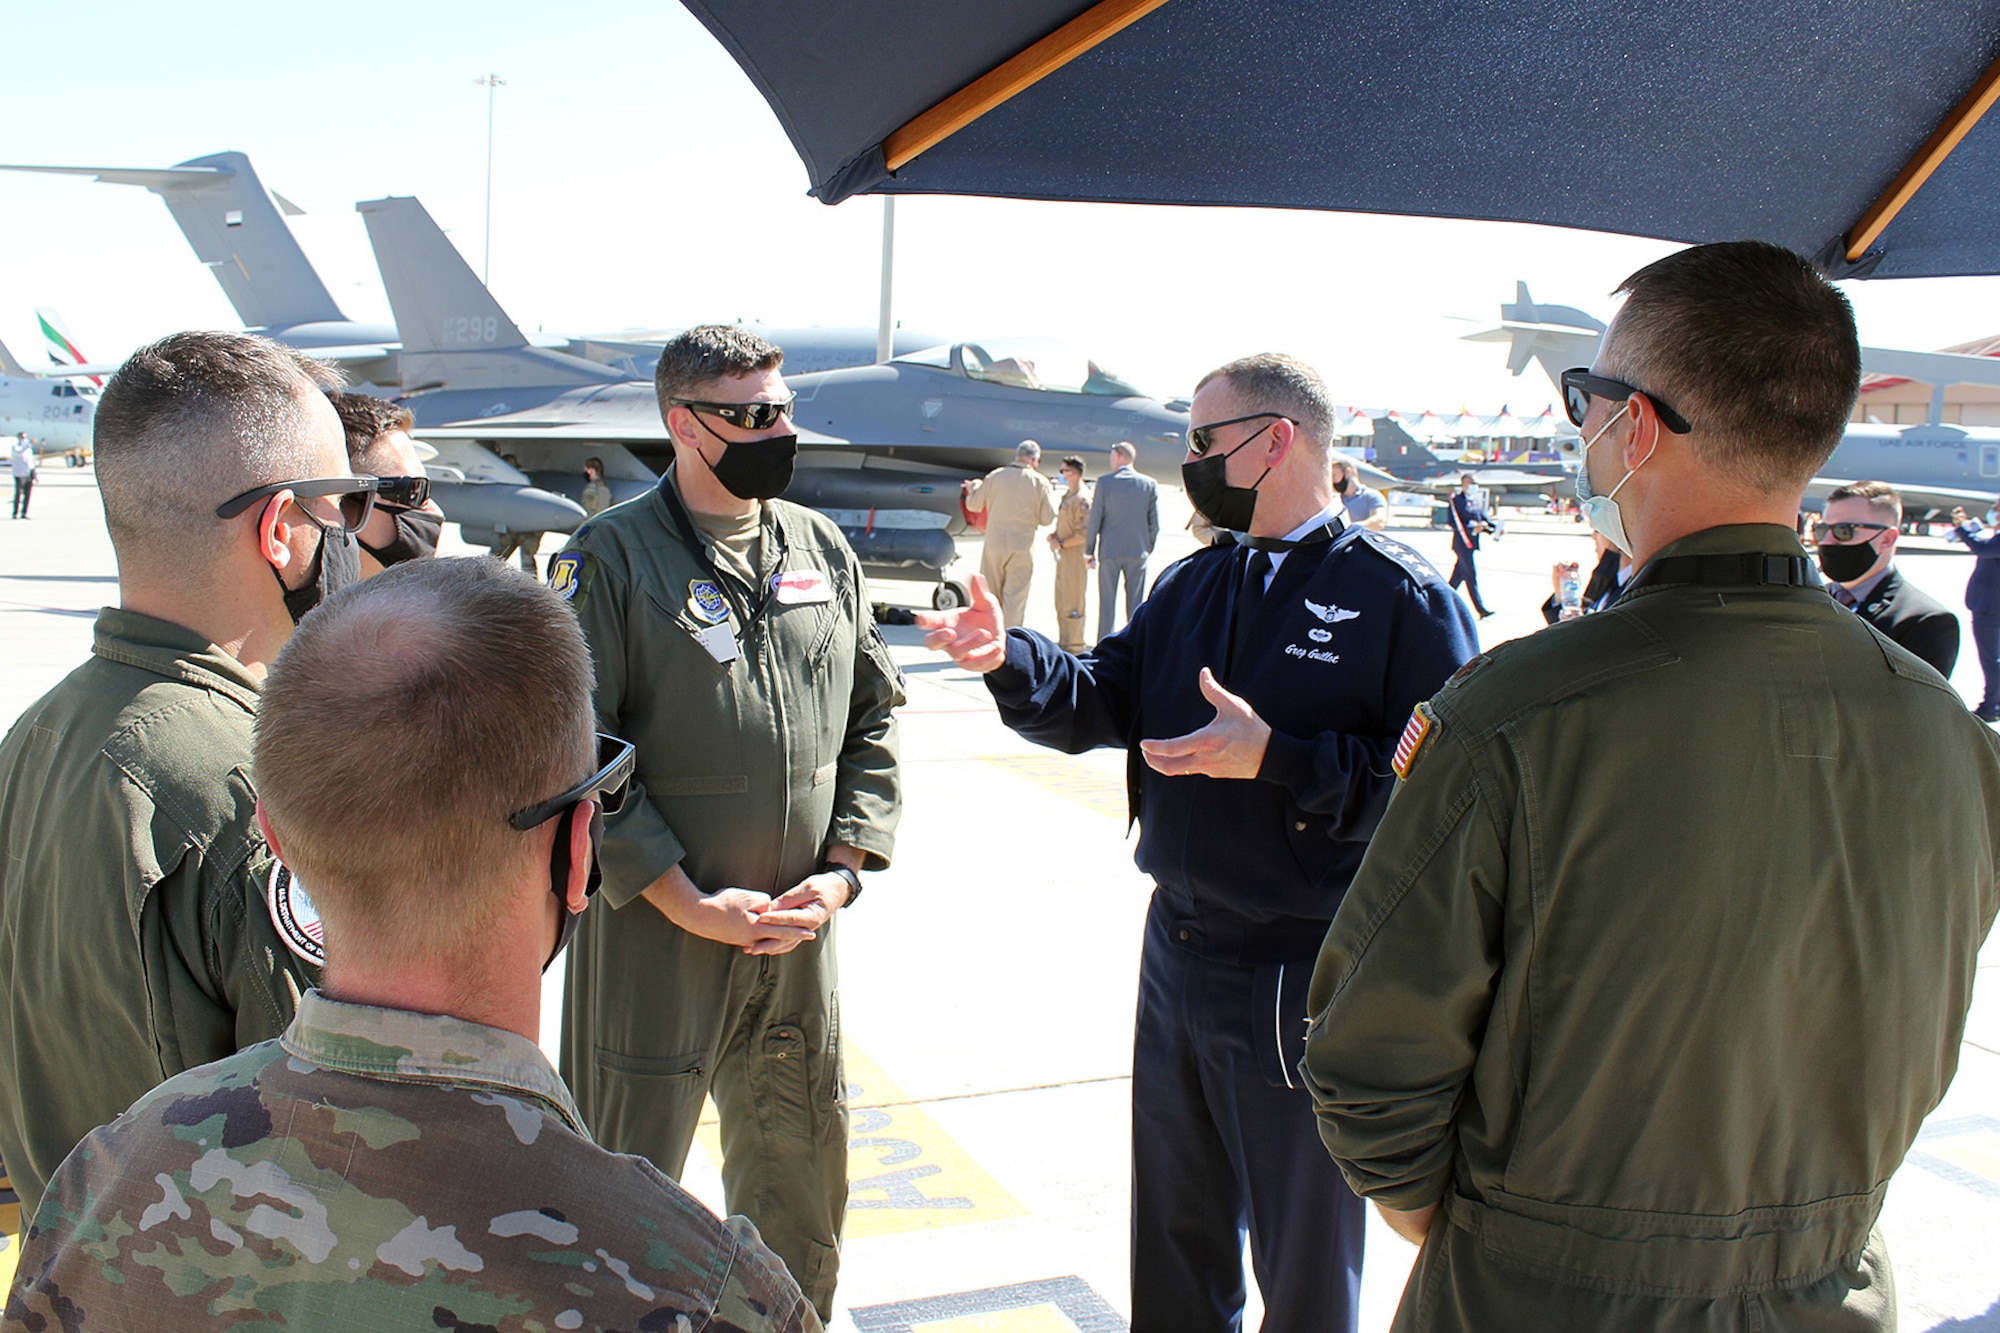 U.S. Air Force Lt. Gen. Greg Guillot, the 9th Air Force (Air Forces Central) commander, talks with the air crew and maintenance Airmen from a KC-46 Pegasus from the 22nd Air Refueling Wing at the Dubai Airshow, United Arab Emirates, Nov. 14, 2021. U.S. military participation in the DAS builds upon strong relations with the United Arab Emirates and enhances relationships with other allies and partners in the region. (U.S. Air Force photo by Master Sgt. Dan Heaton)